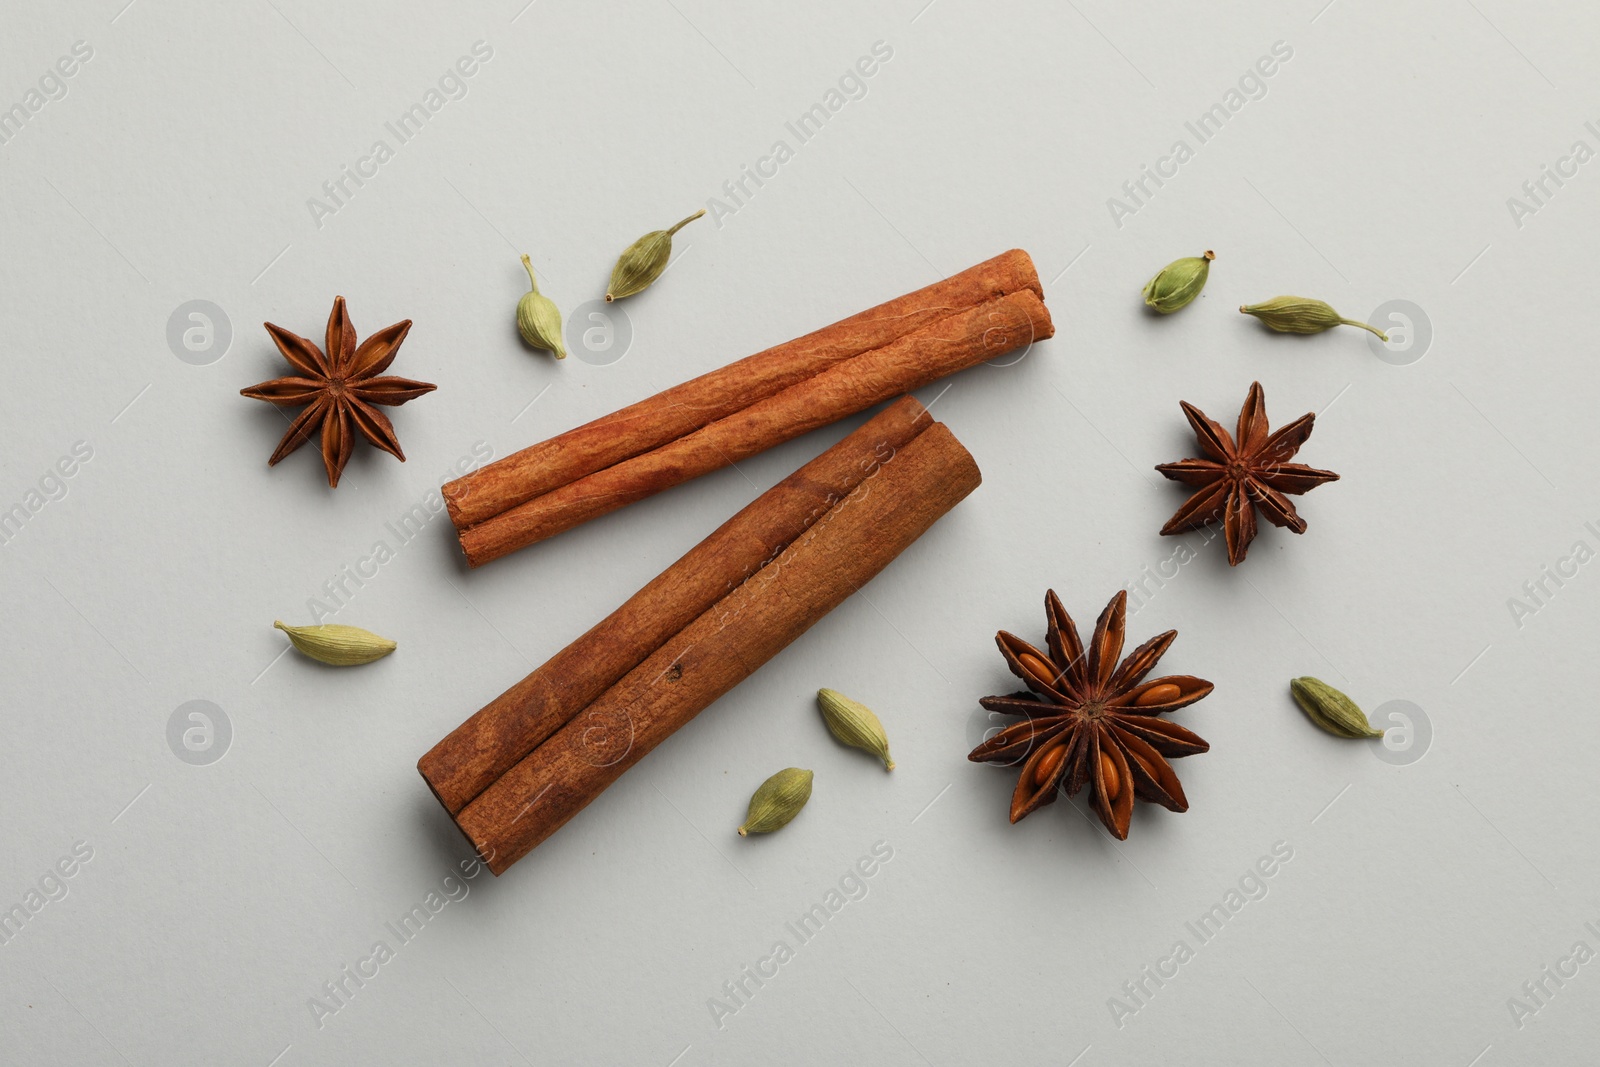 Photo of Cinnamon sticks, star anise and cardamom pods on light grey background, flat lay